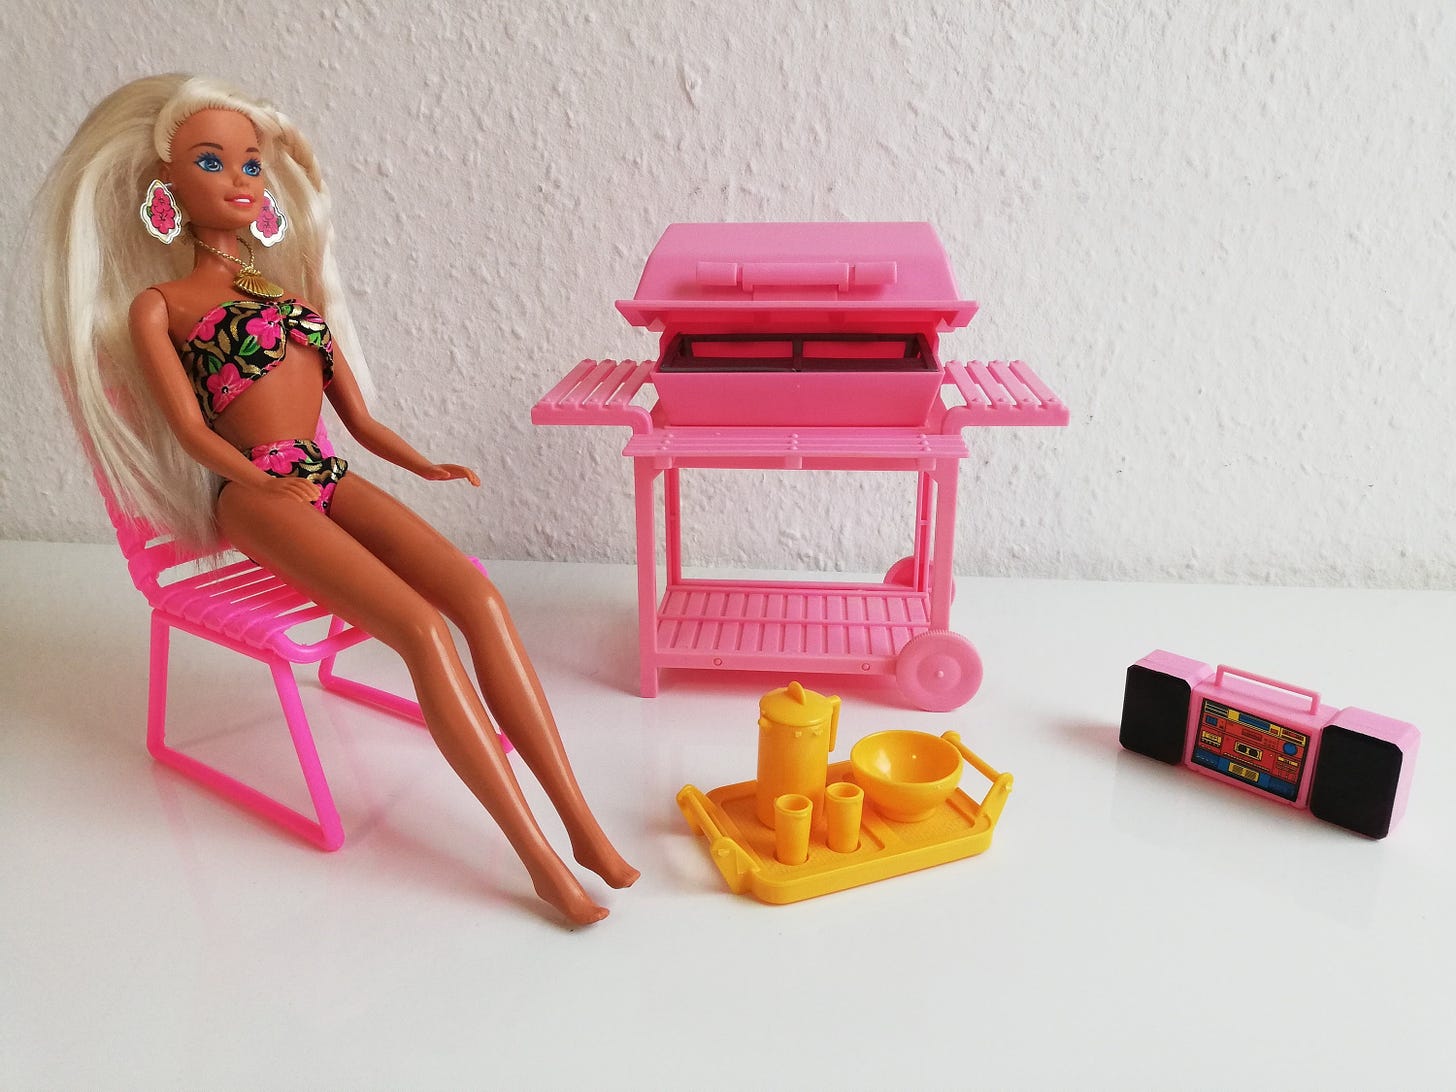 Display of a Barbie doll next to a pink grill. 